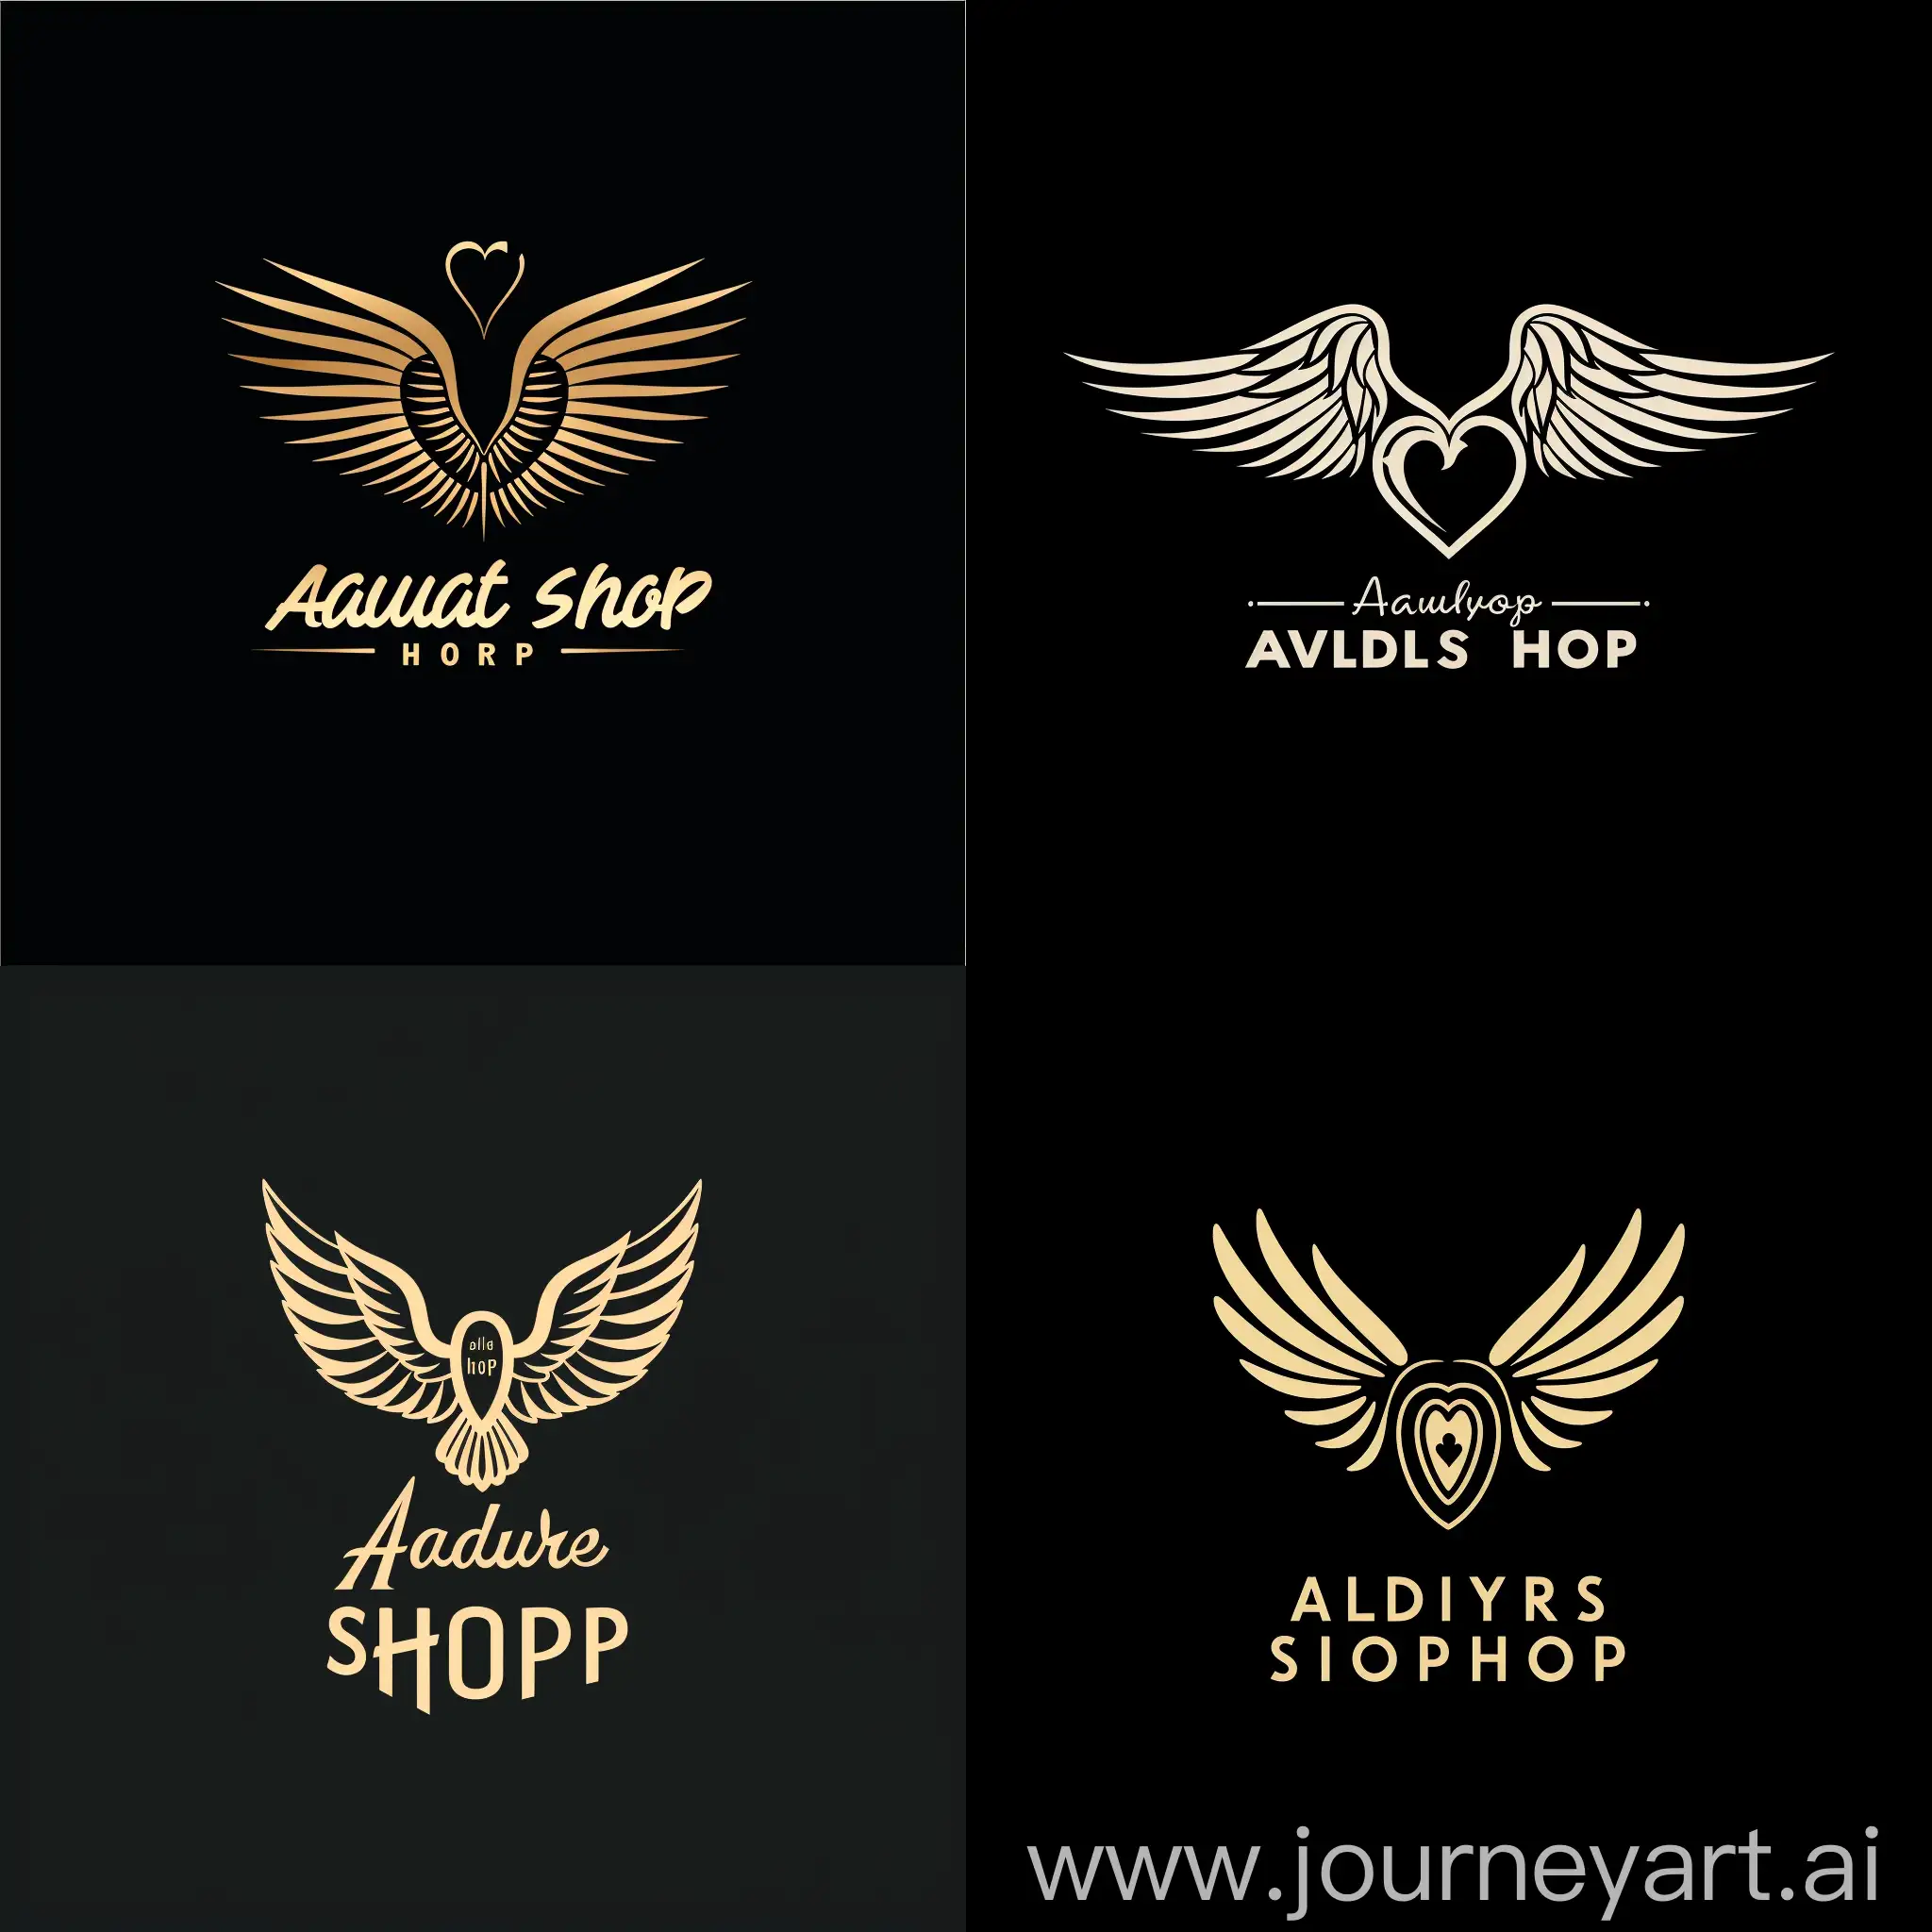 Minimalistic-Logo-Design-for-Angel-Shop-in-Standoff-2-Internet-Game-Currency-Store